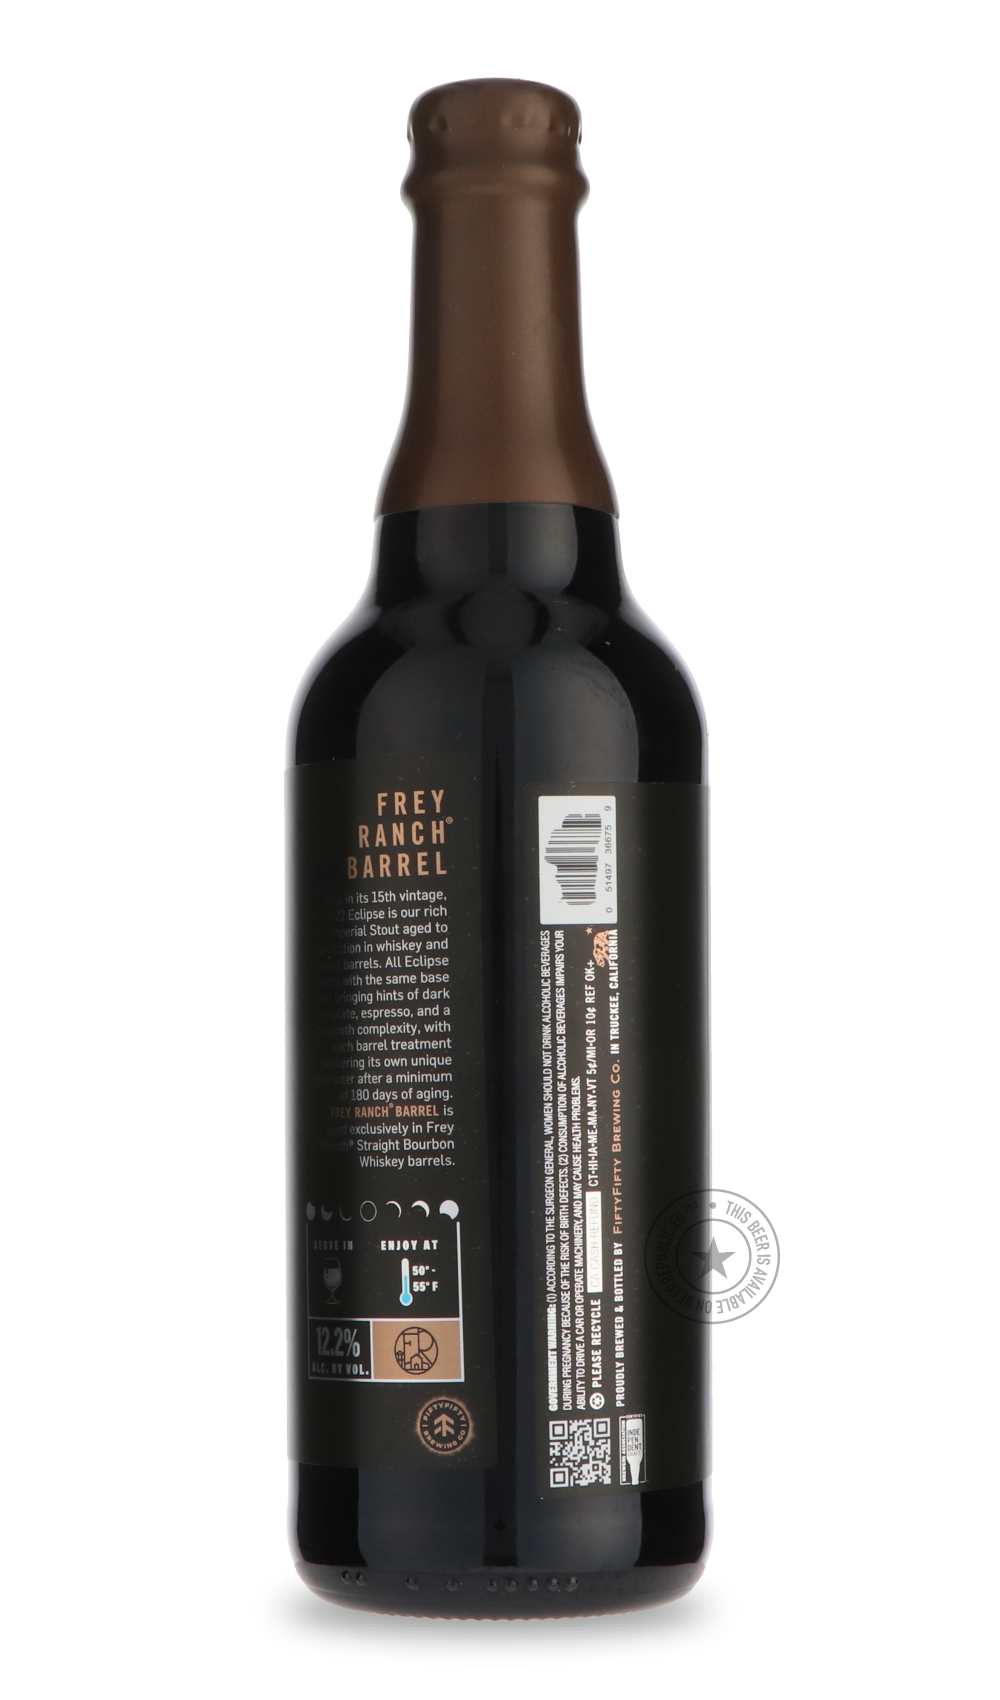 -FiftyFifty- Eclipse - Frey Ranch (2022)-Stout & Porter- Only @ Beer Republic - The best online beer store for American & Canadian craft beer - Buy beer online from the USA and Canada - Bier online kopen - Amerikaans bier kopen - Craft beer store - Craft beer kopen - Amerikanisch bier kaufen - Bier online kaufen - Acheter biere online - IPA - Stout - Porter - New England IPA - Hazy IPA - Imperial Stout - Barrel Aged - Barrel Aged Imperial Stout - Brown - Dark beer - Blond - Blonde - Pilsner - Lager - Wheat 